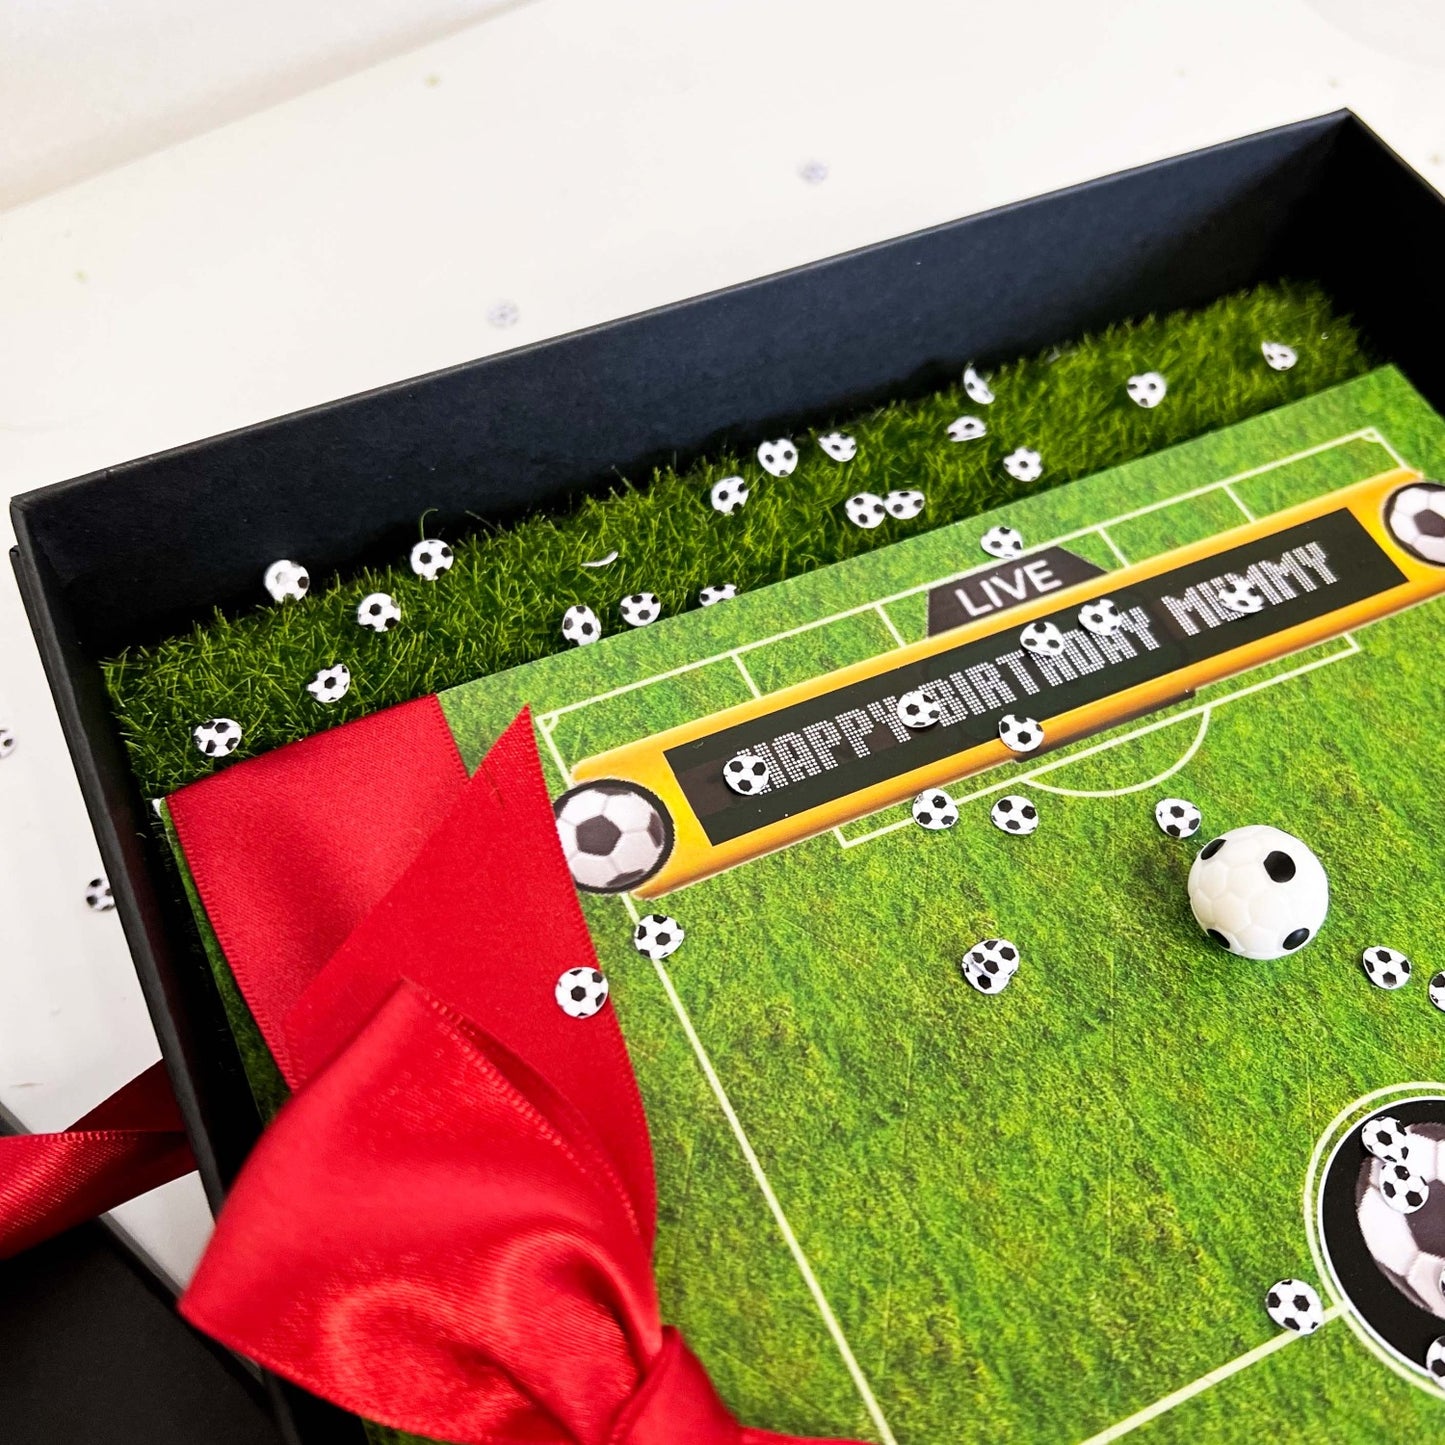 Football pitch birthday card on astroturf grass scented with pitch the grassy fragrance